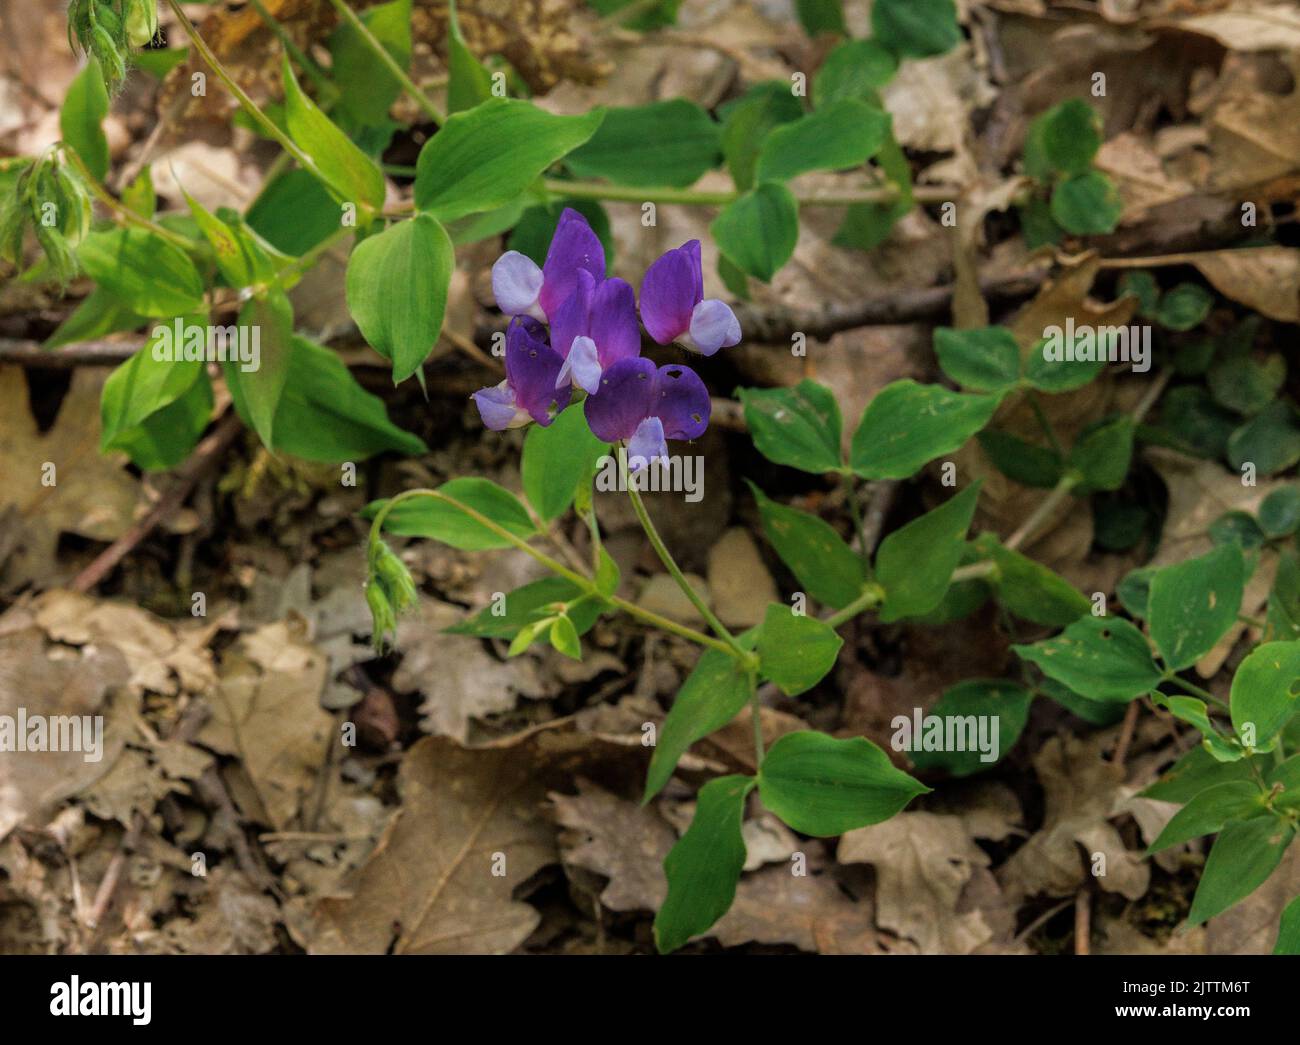 A vetchling, Lathyrus laxiflorus in open woodland, Greece. Stock Photo